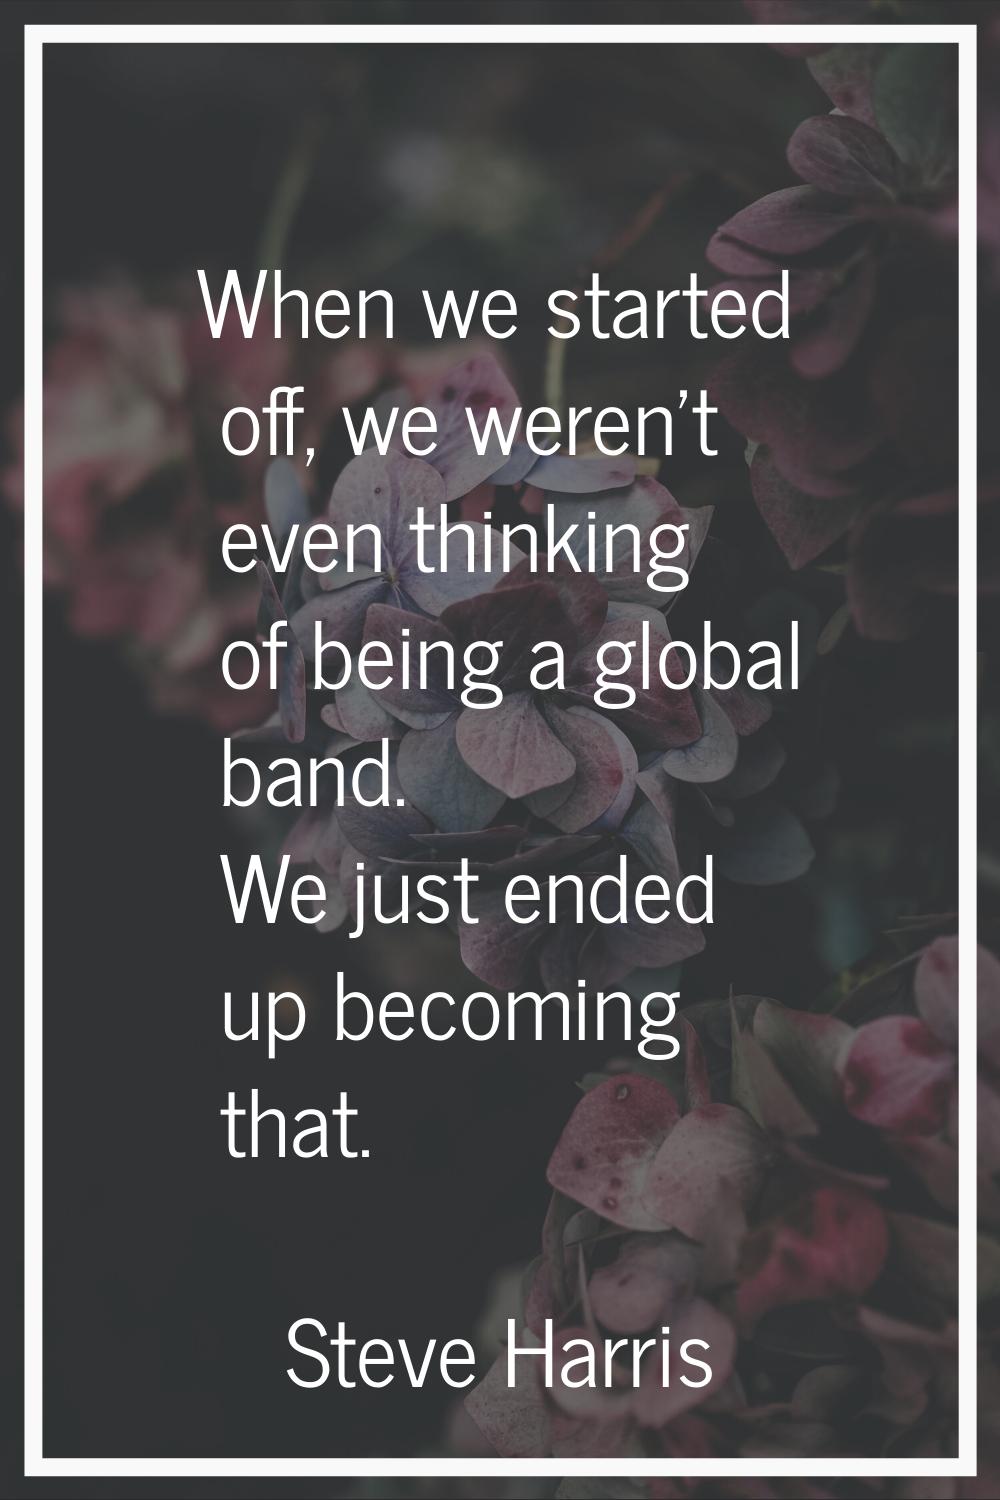 When we started off, we weren’t even thinking of being a global band. We just ended up becoming tha